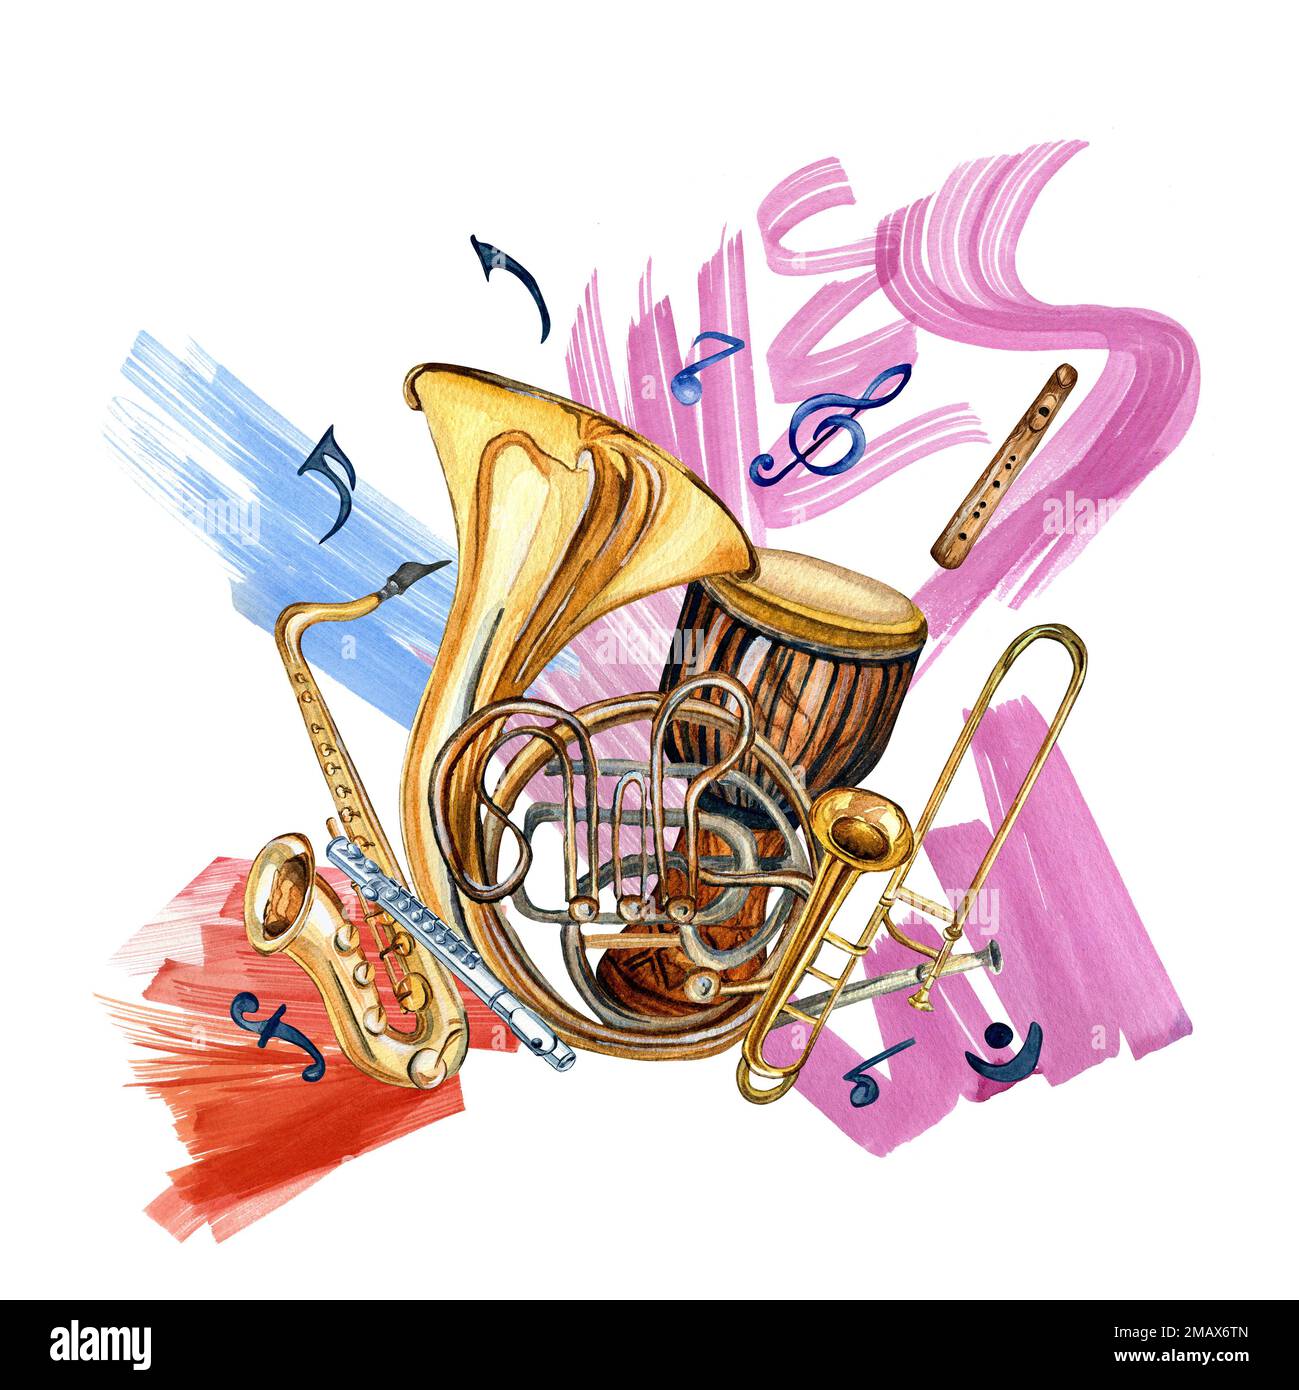 Wind musical instruments, symbol and paint stroke watercolor illustration isolated. Djembe, horn, flute, tuba, saxophone hand drawn. Design element fo Stock Photo